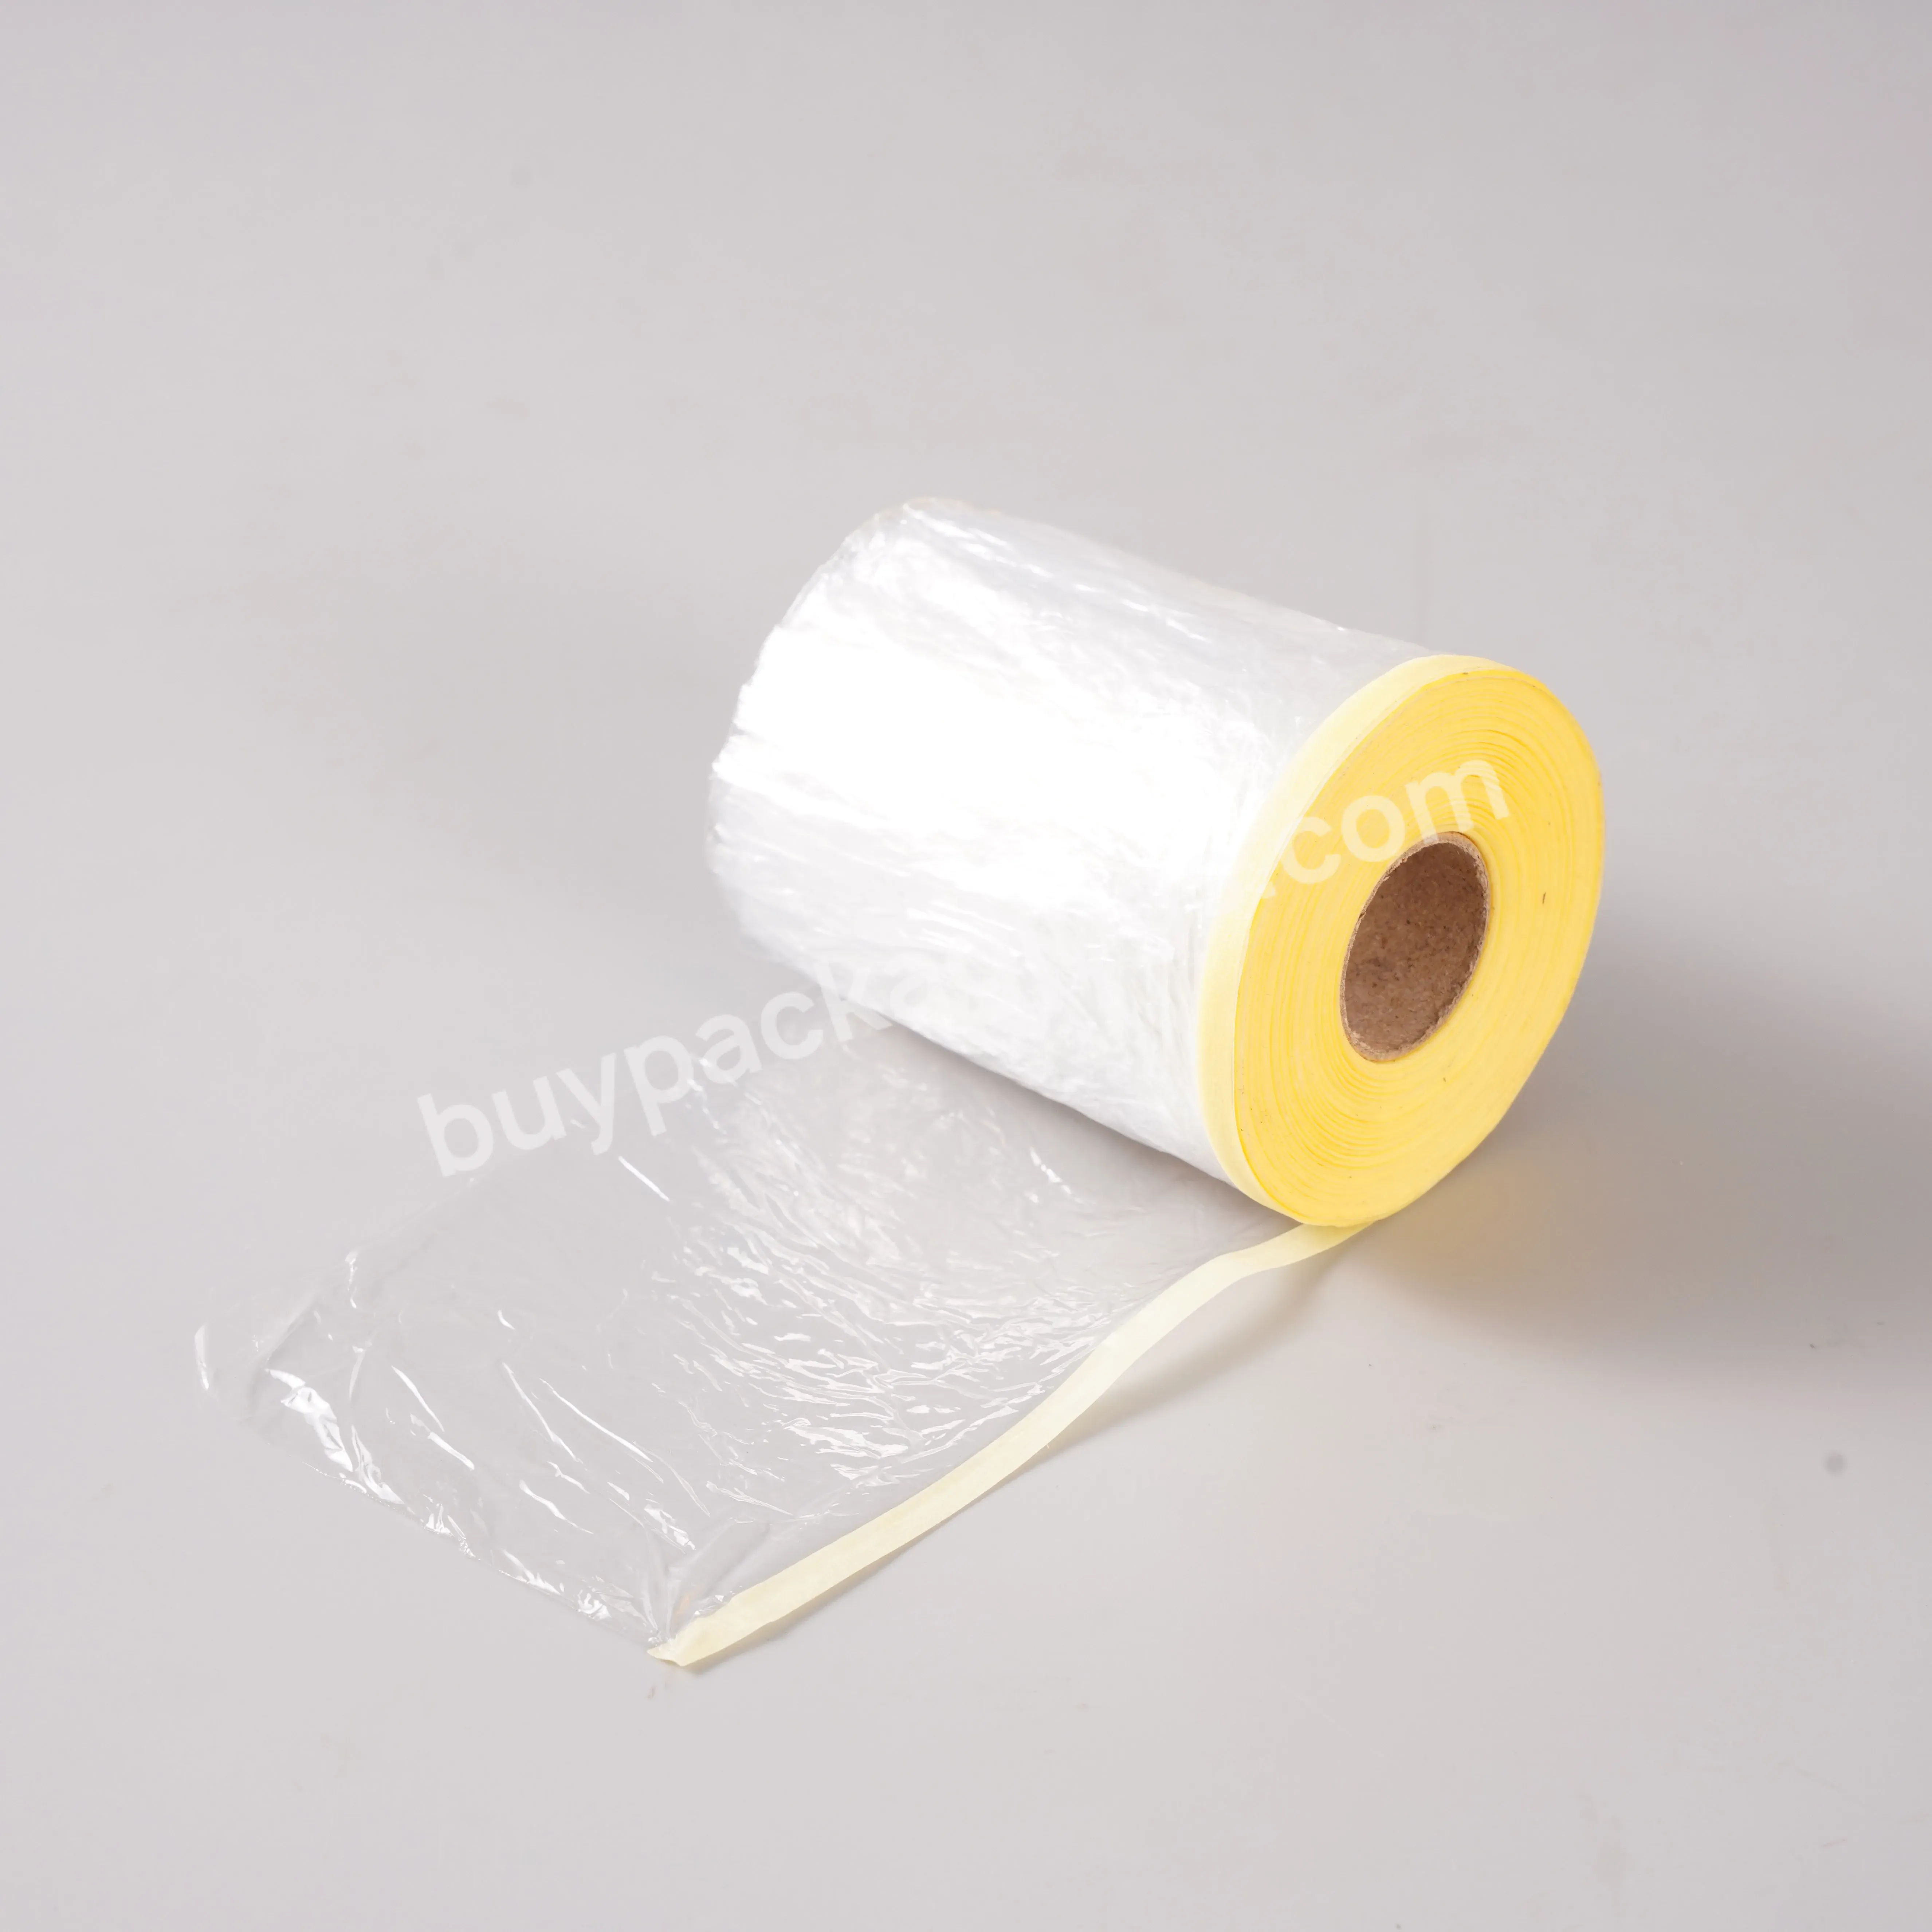 Not Easily Damaged Manufacturer Clear Packaging Material White Plastic Film For Sneakers And Furniture Protective